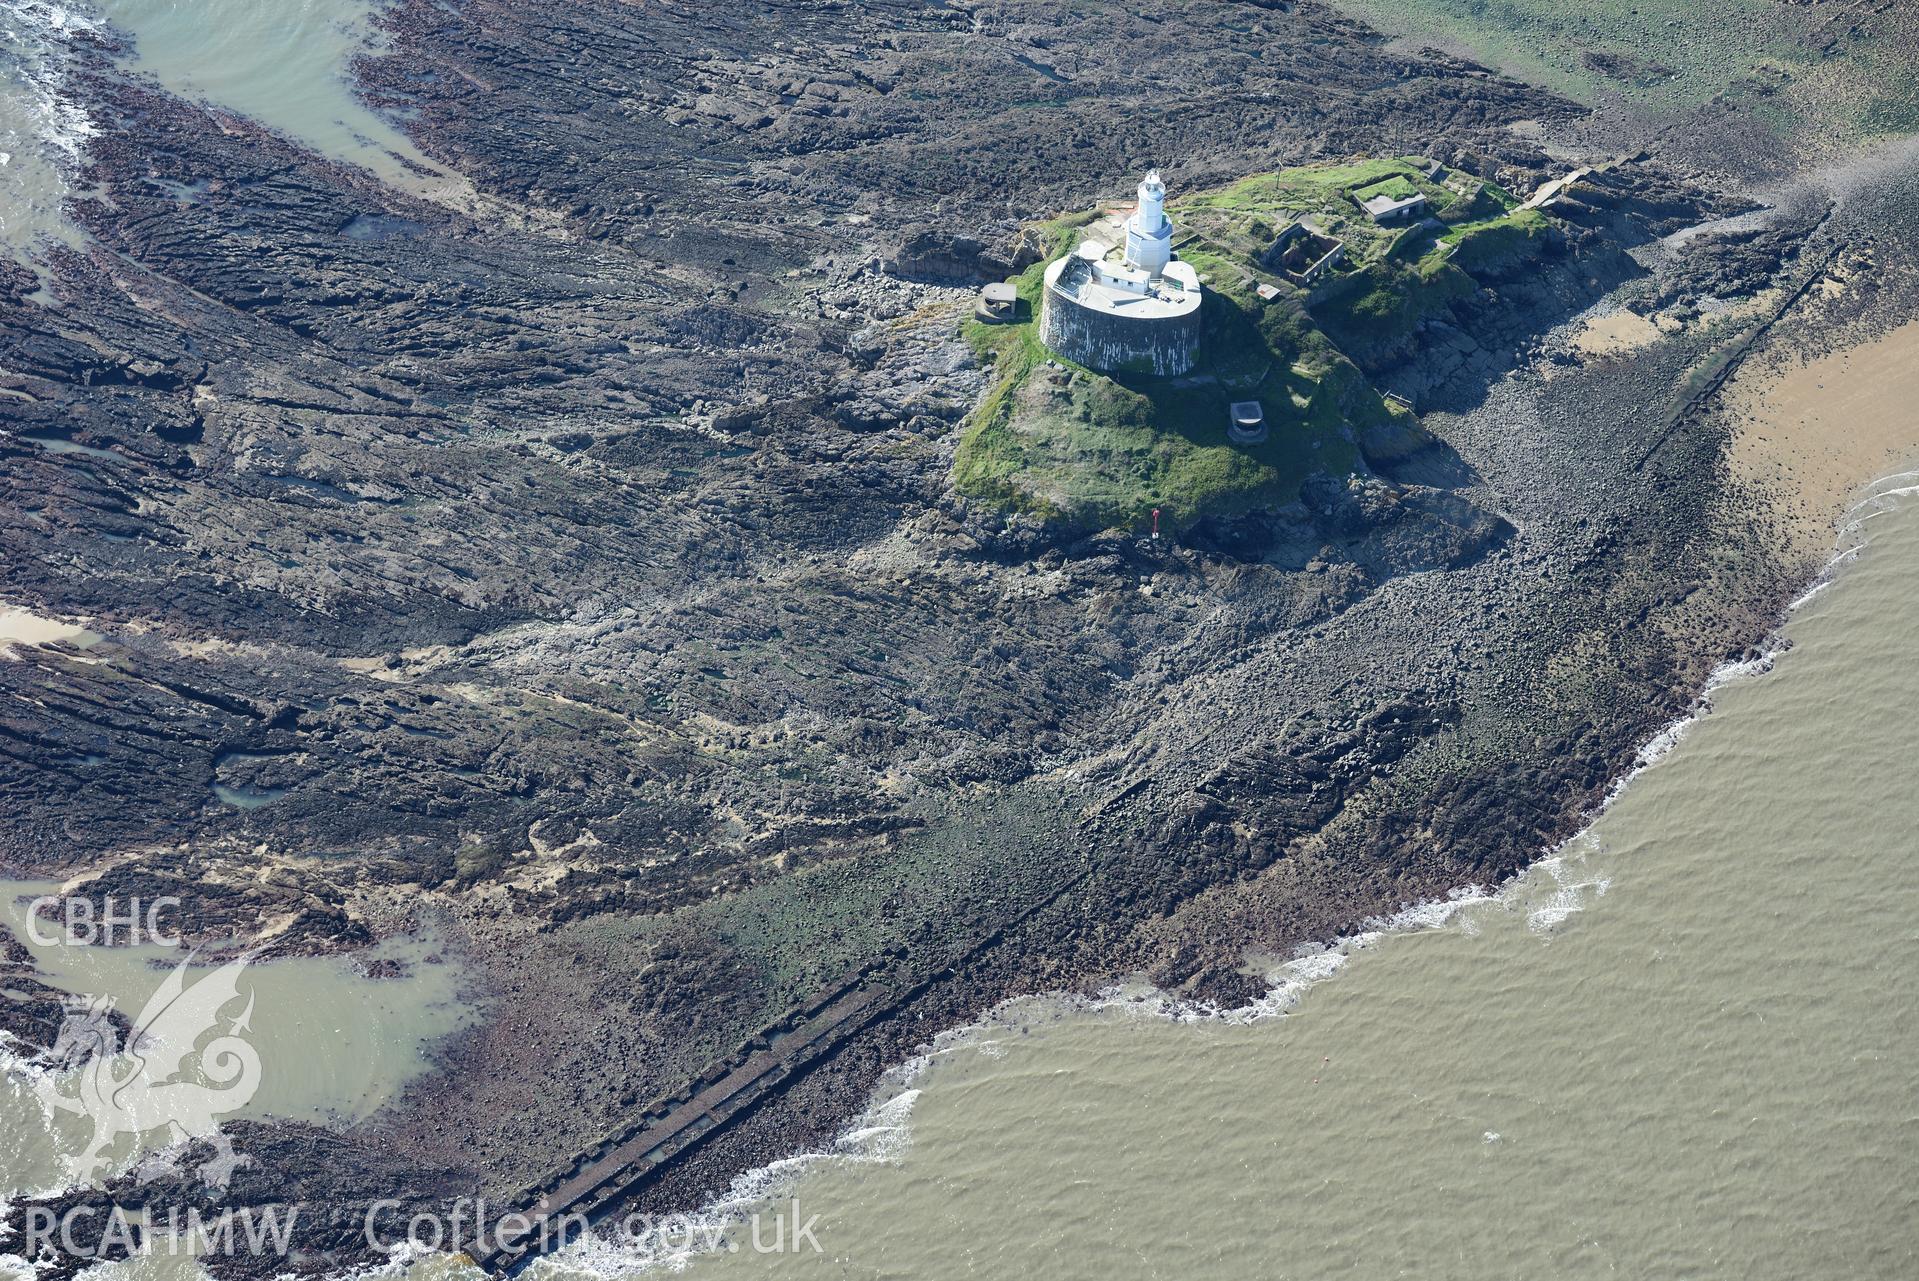 Mumbles fort, coast artillery searchlights and Mumbles lighthouse on south western edge of Swansea Bay. Oblique aerial photograph taken during the Royal Commission's programme of archaeological aerial reconnaissance by Toby Driver, 30th September 2015.